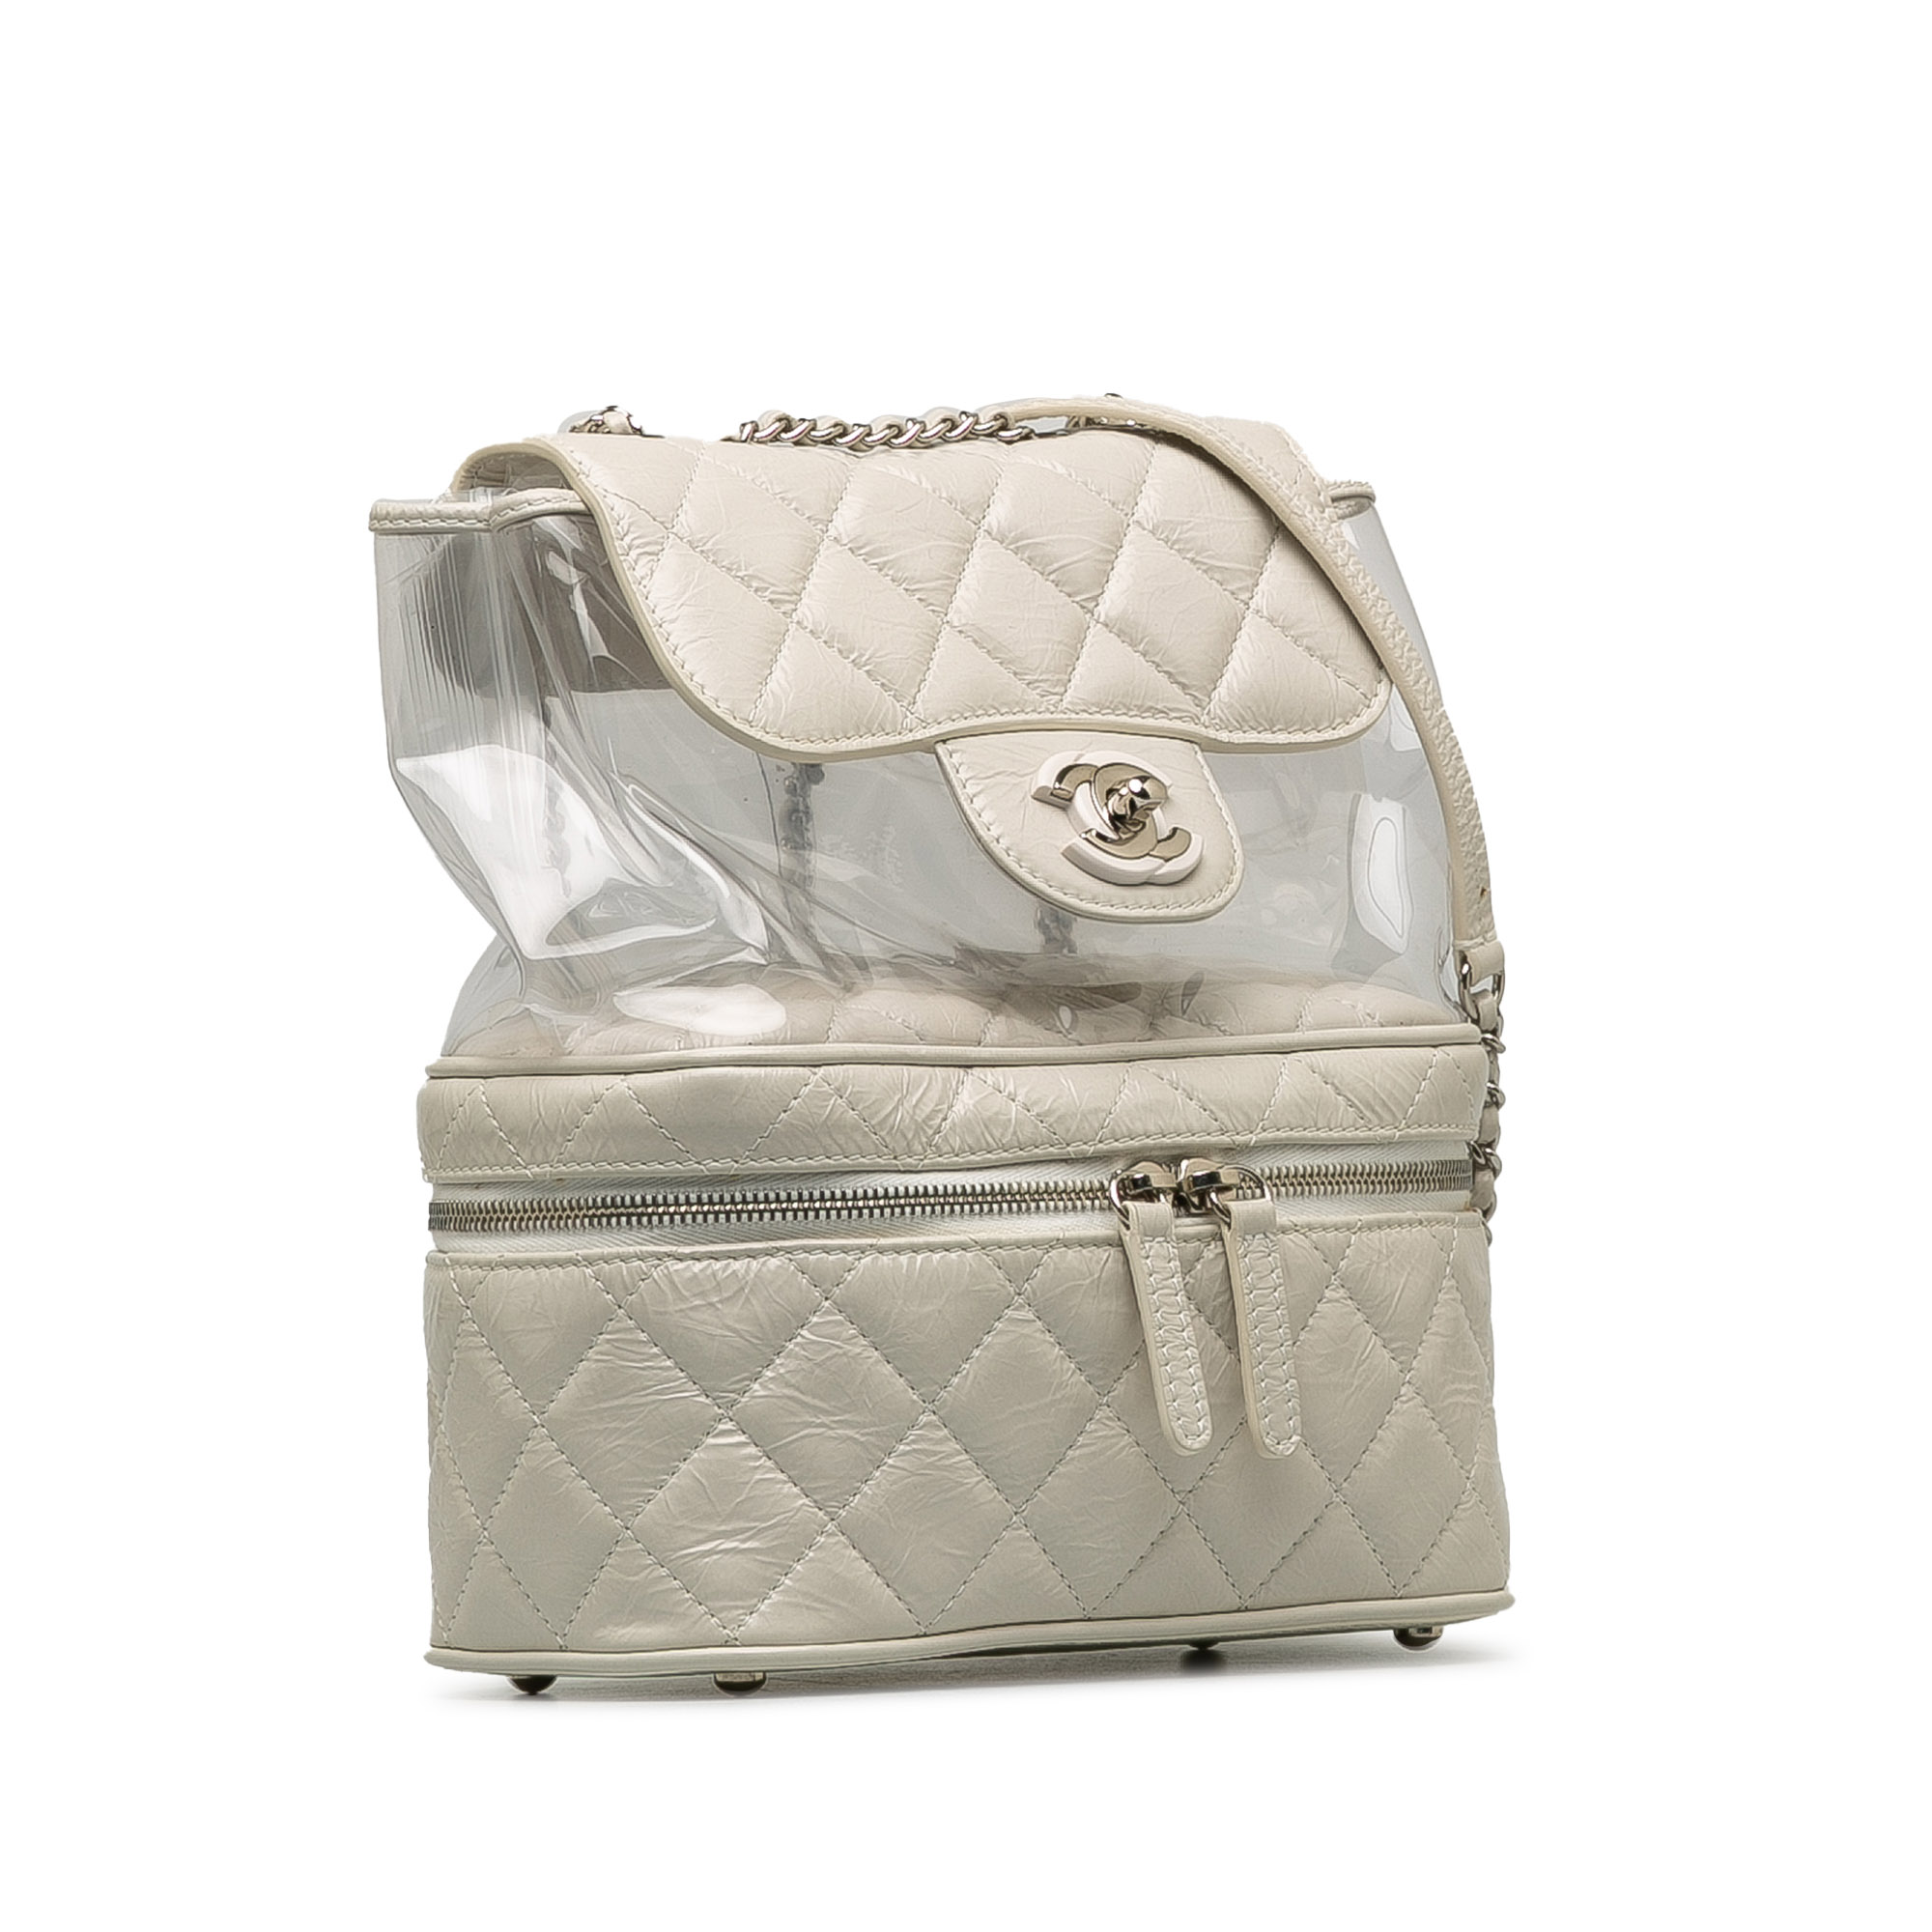 Quilted Leather Backpack with PVC Body and Chain Straps